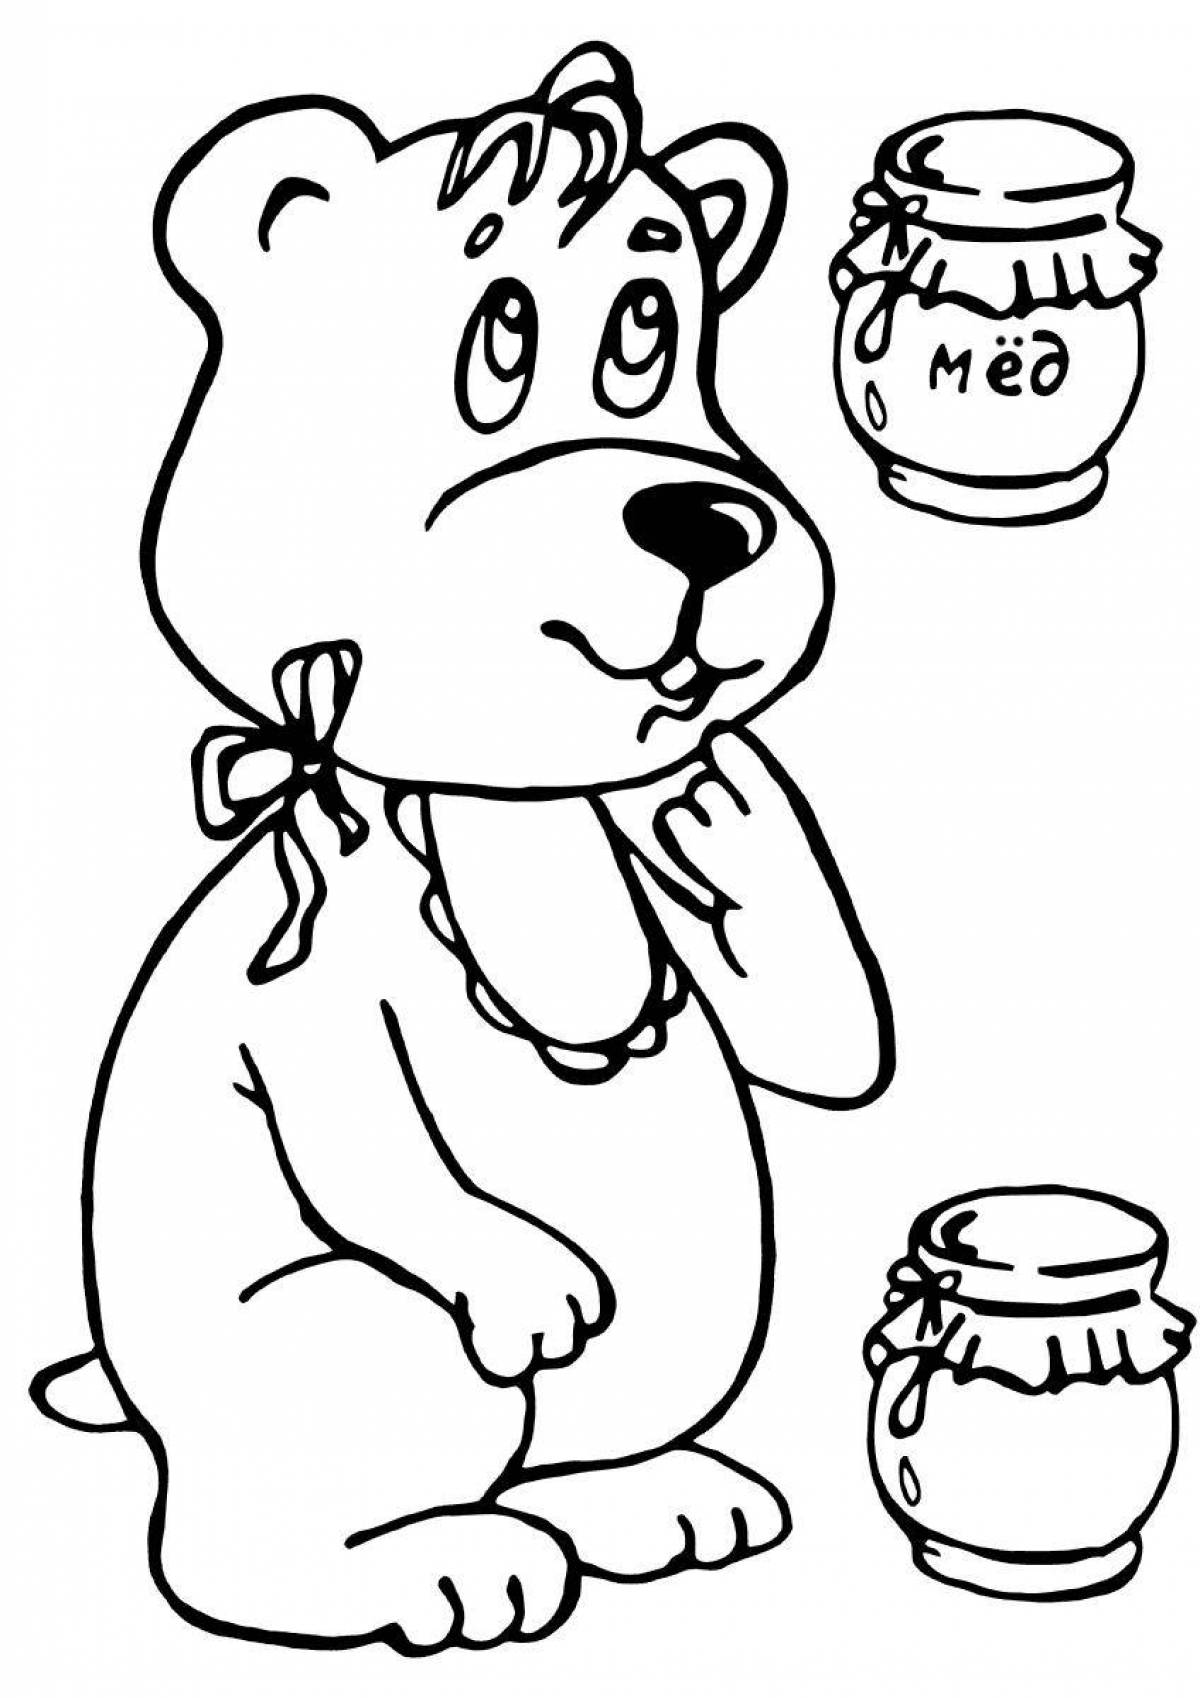 Glowing honey coloring page